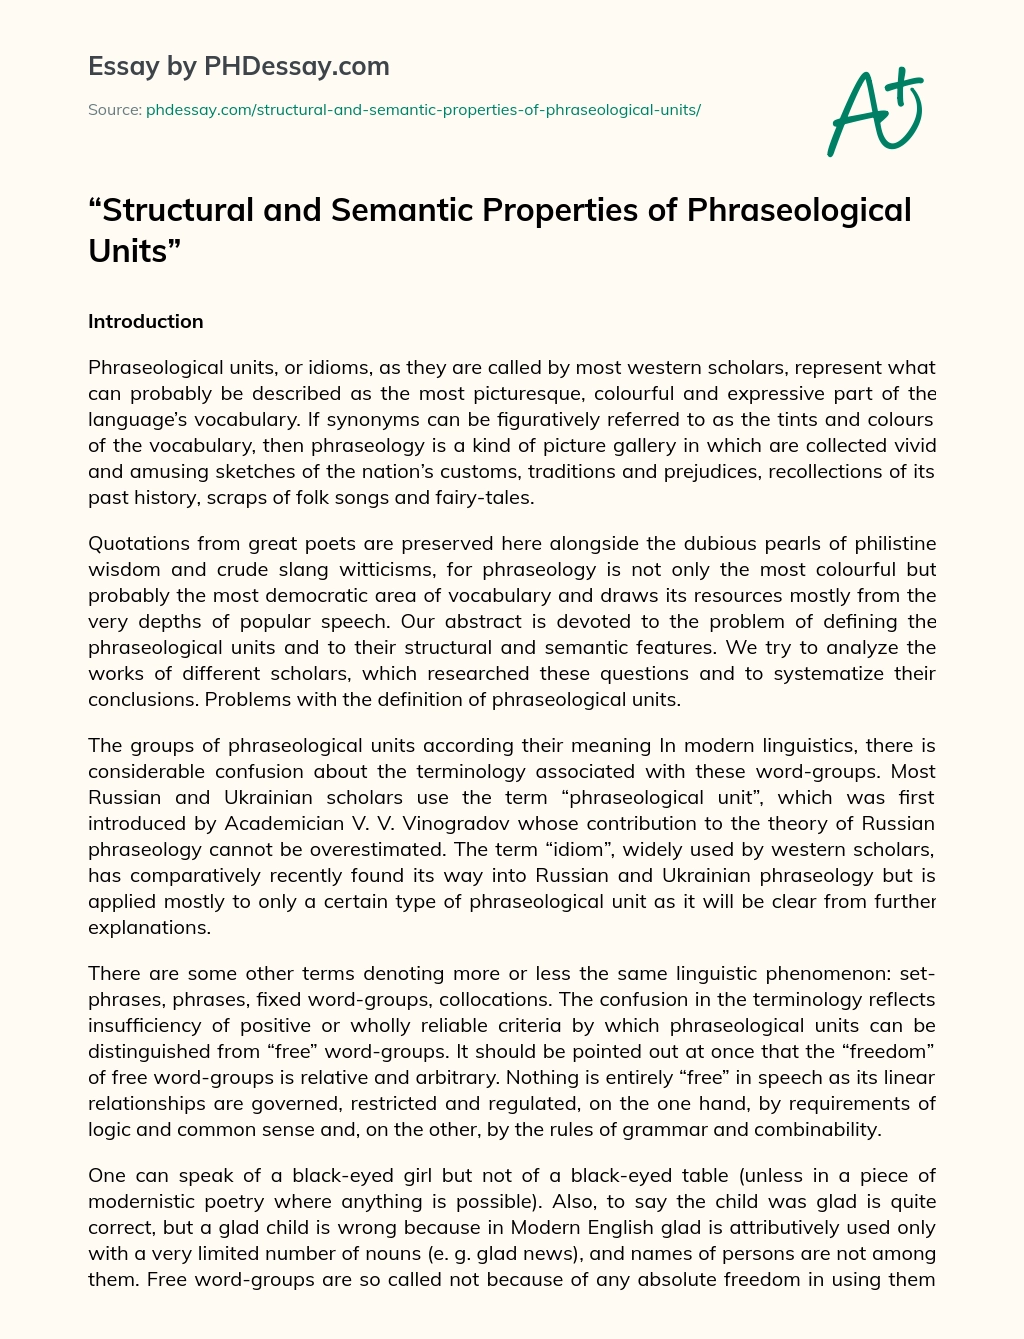 Structural and Semantic Properties of Phraseological Units essay